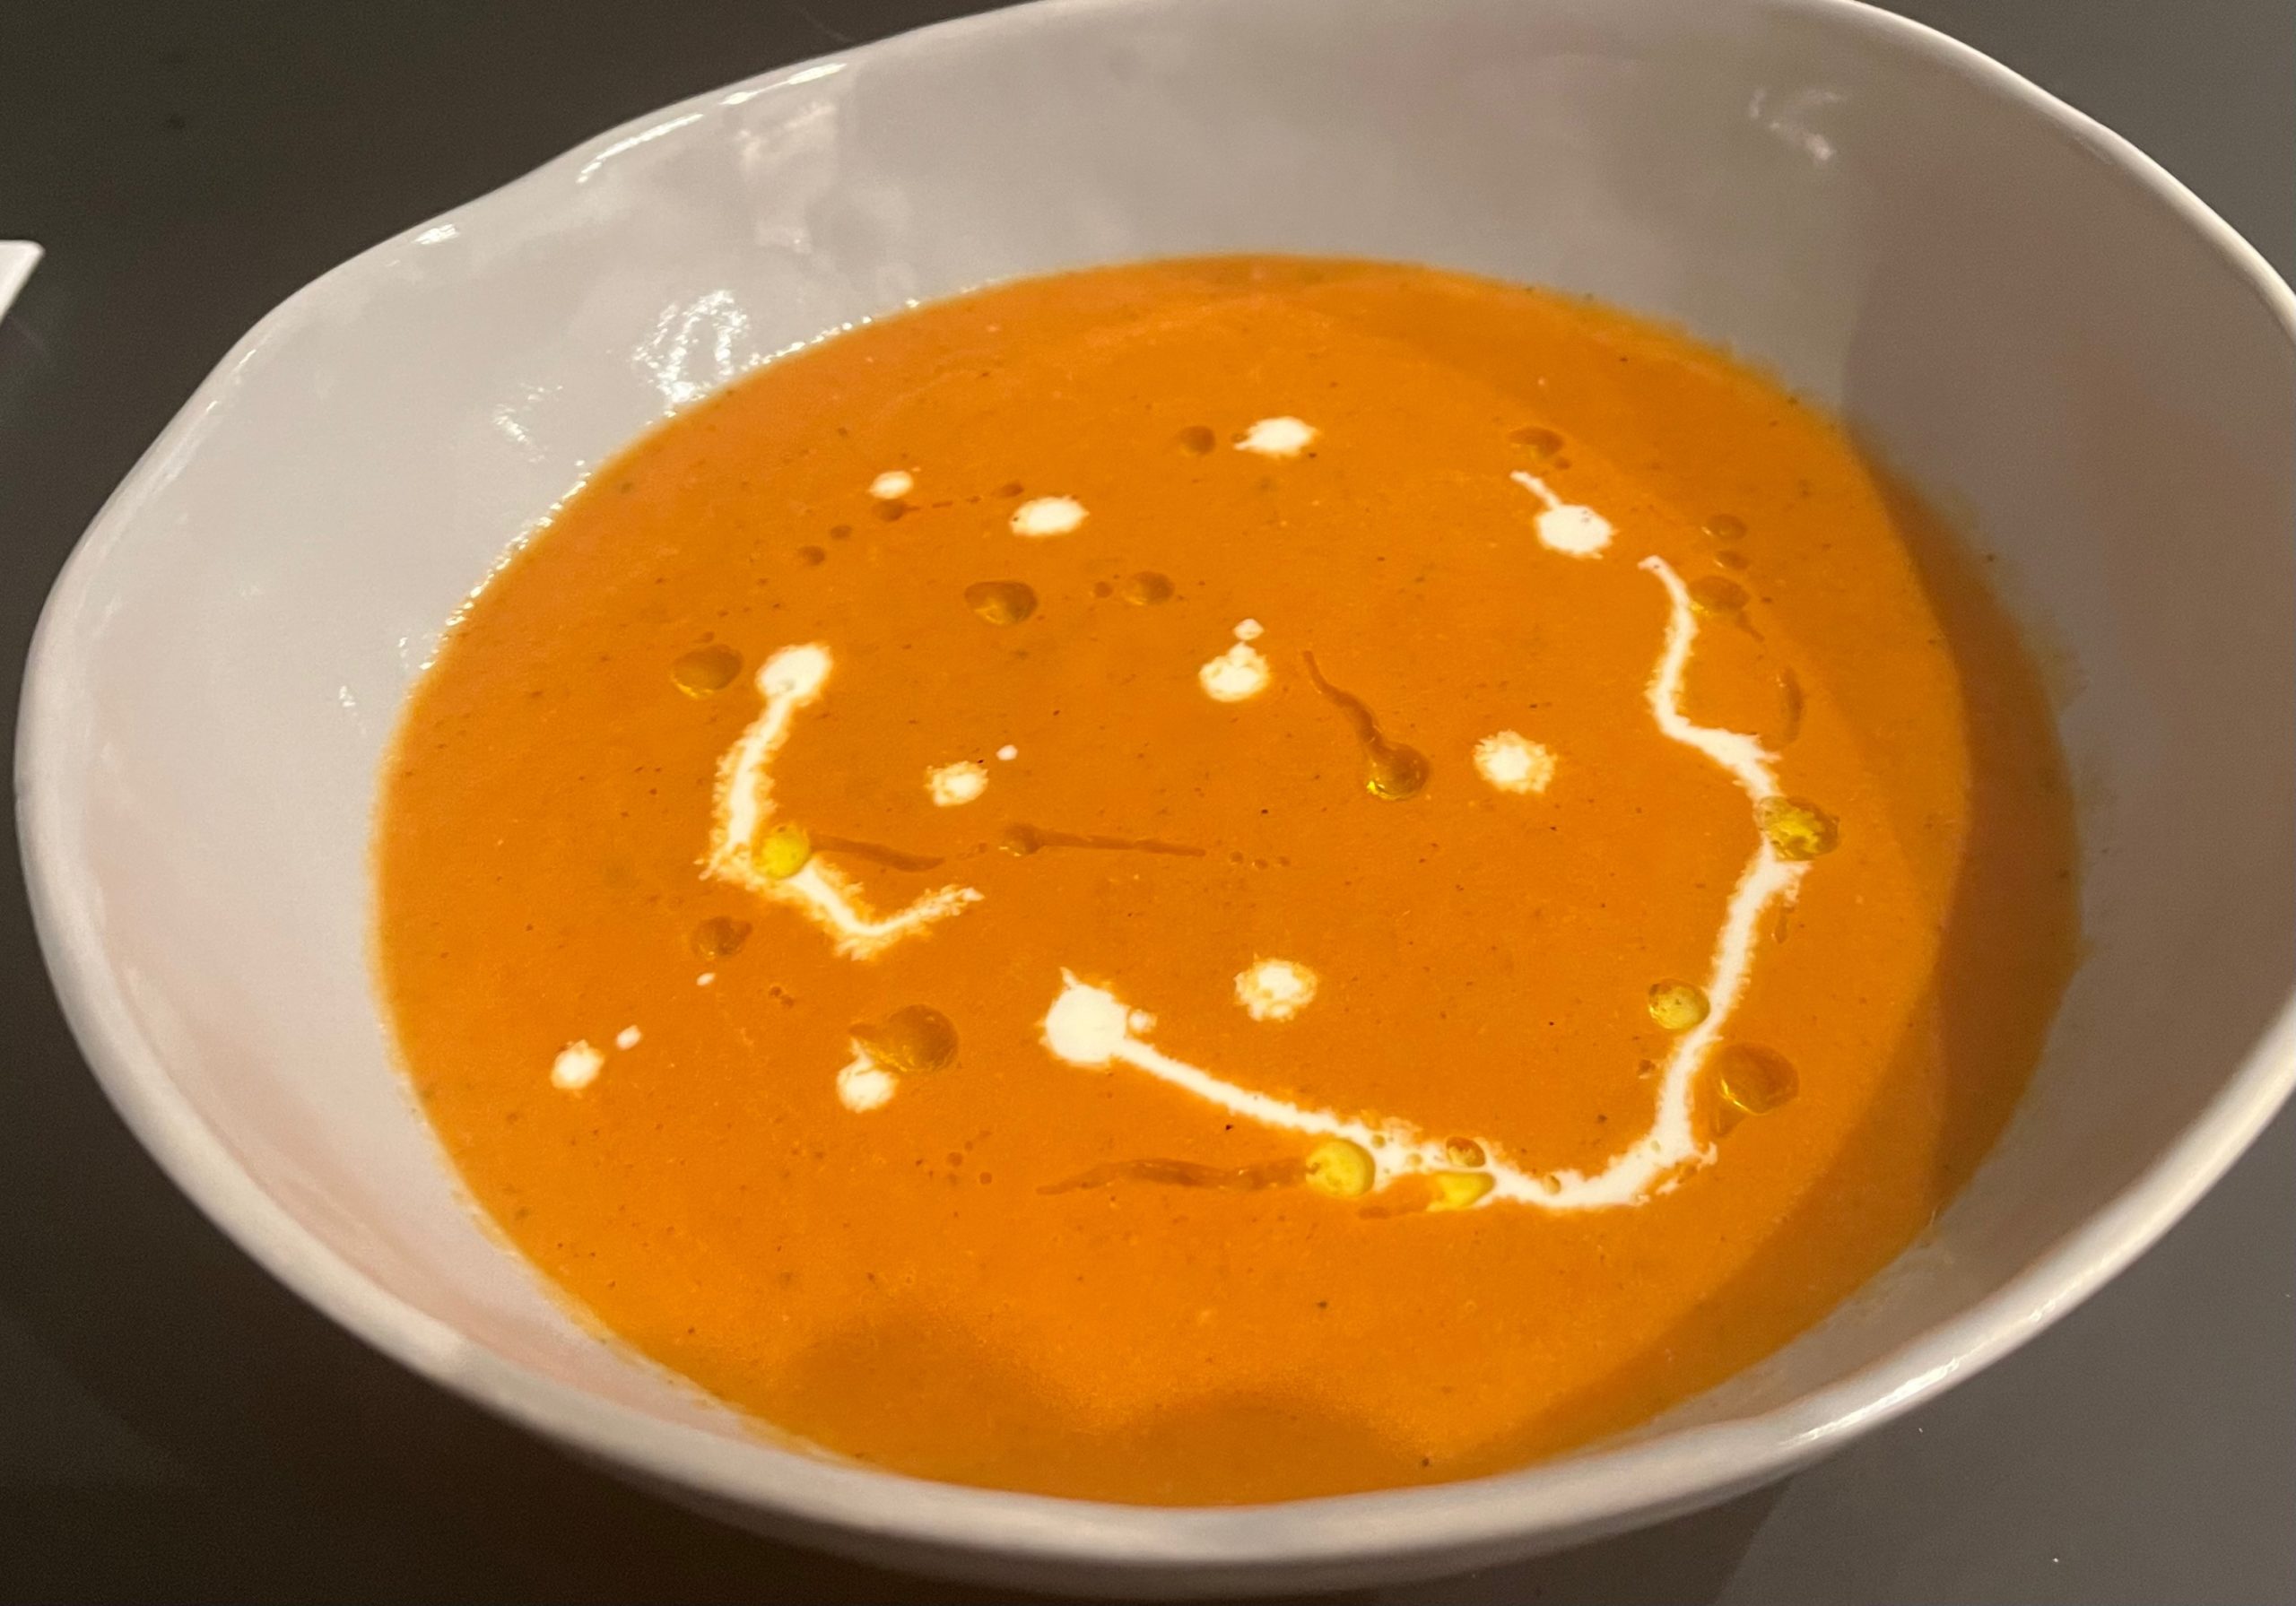 Roasted tomato and bell pepper soup